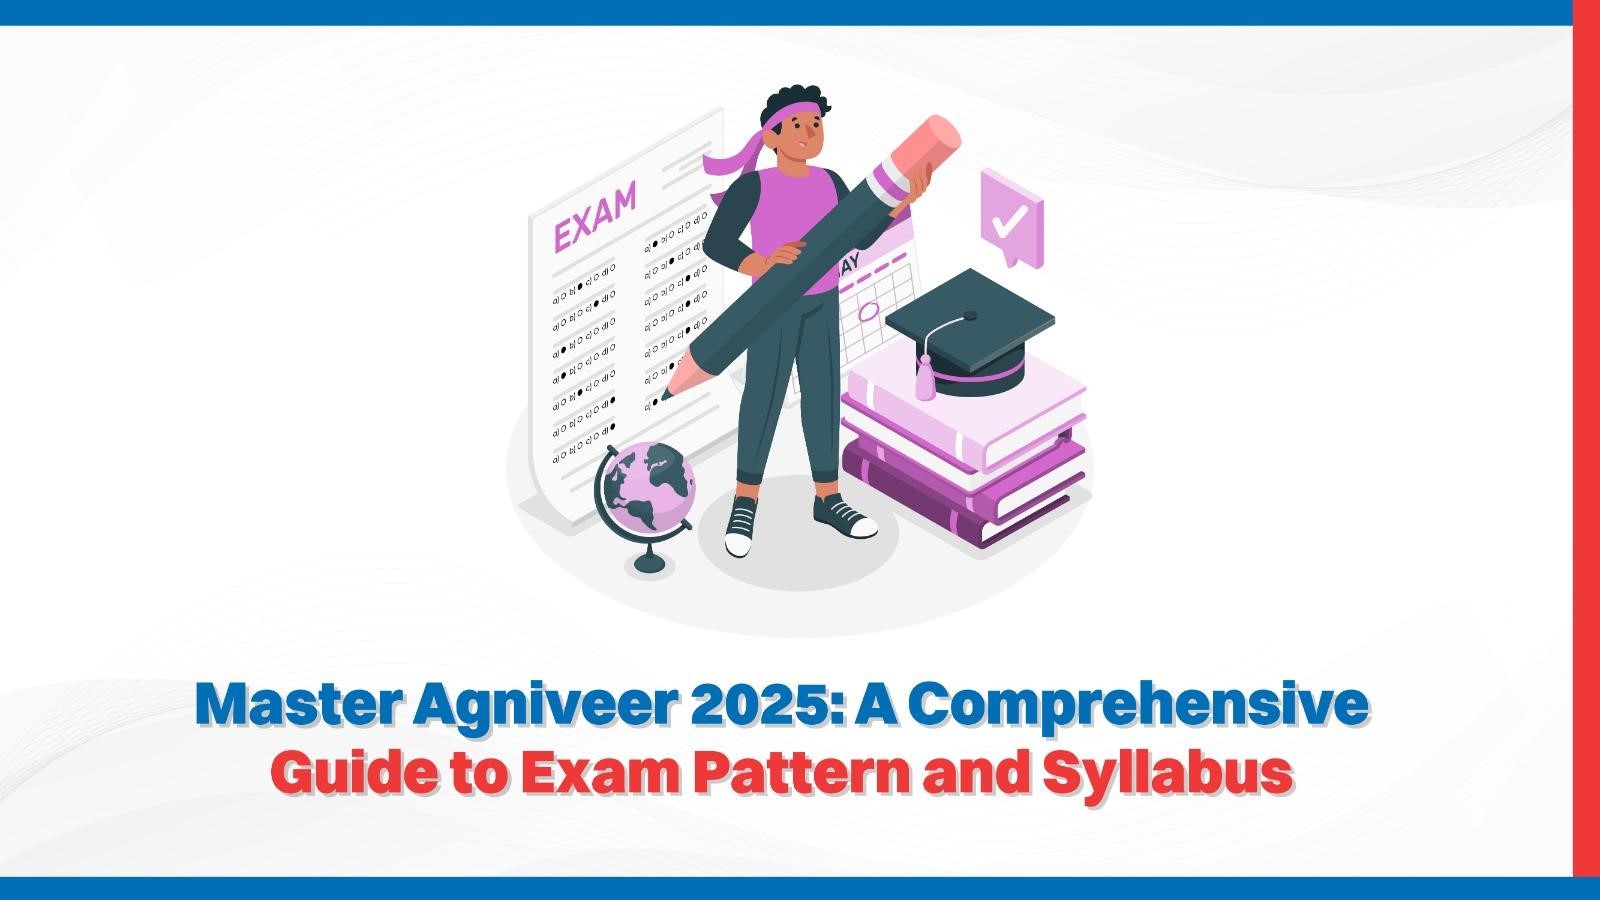 Master Agniveer 2025 A Comprehensive Guide to Exam Pattern and Syllabus.jpg